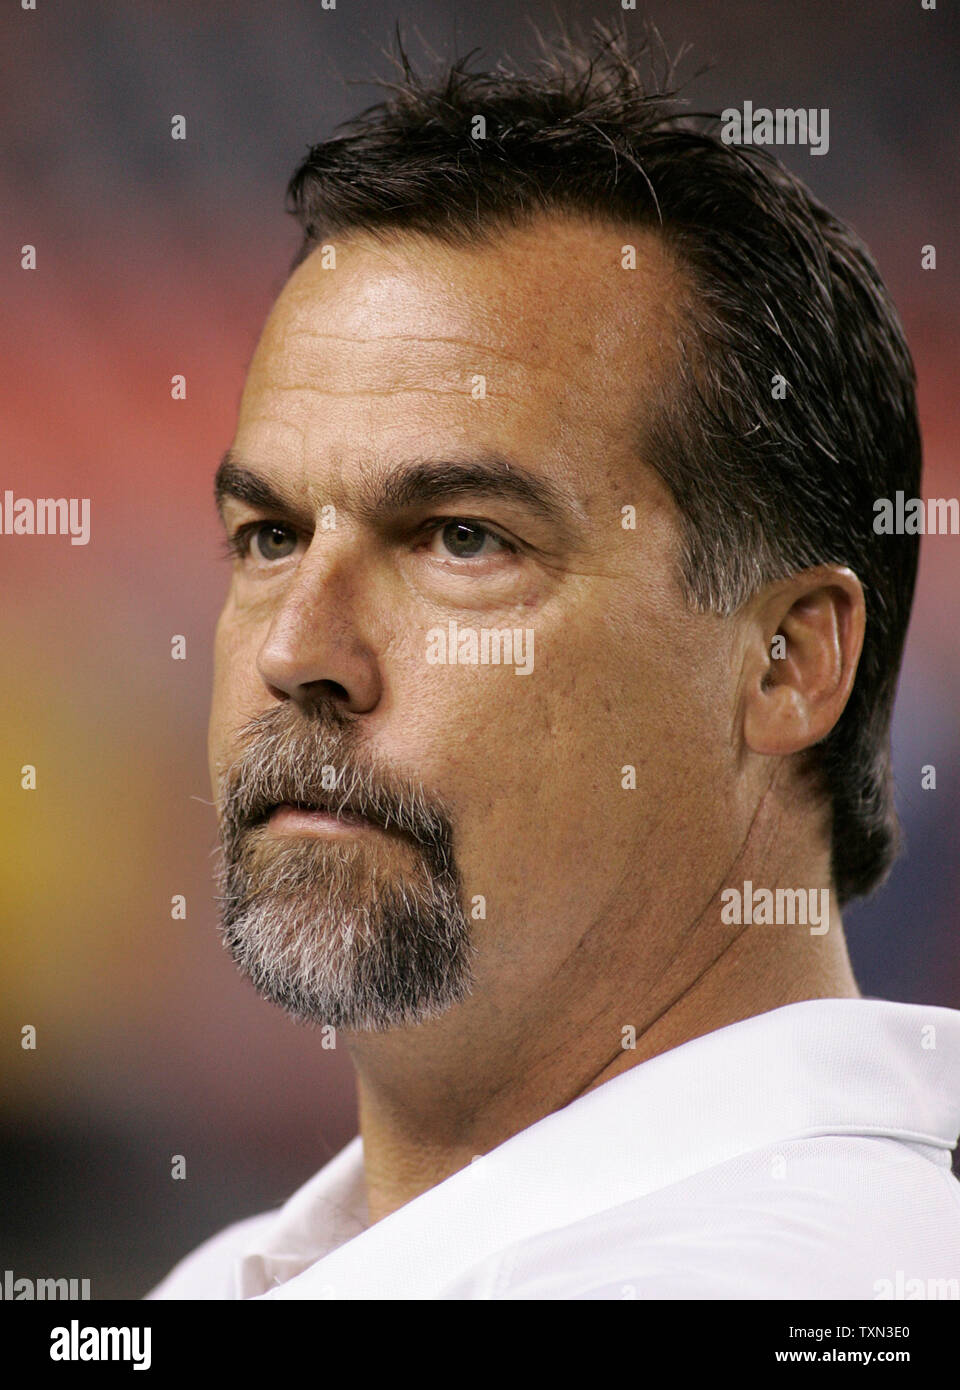 Tennessee Titans Jeff Fisher watches team during pre-game drills at Invesco Field at Mile High in Denver on November 19, 2007.  (UPI Photo/Gary C. Caskey) Stock Photo